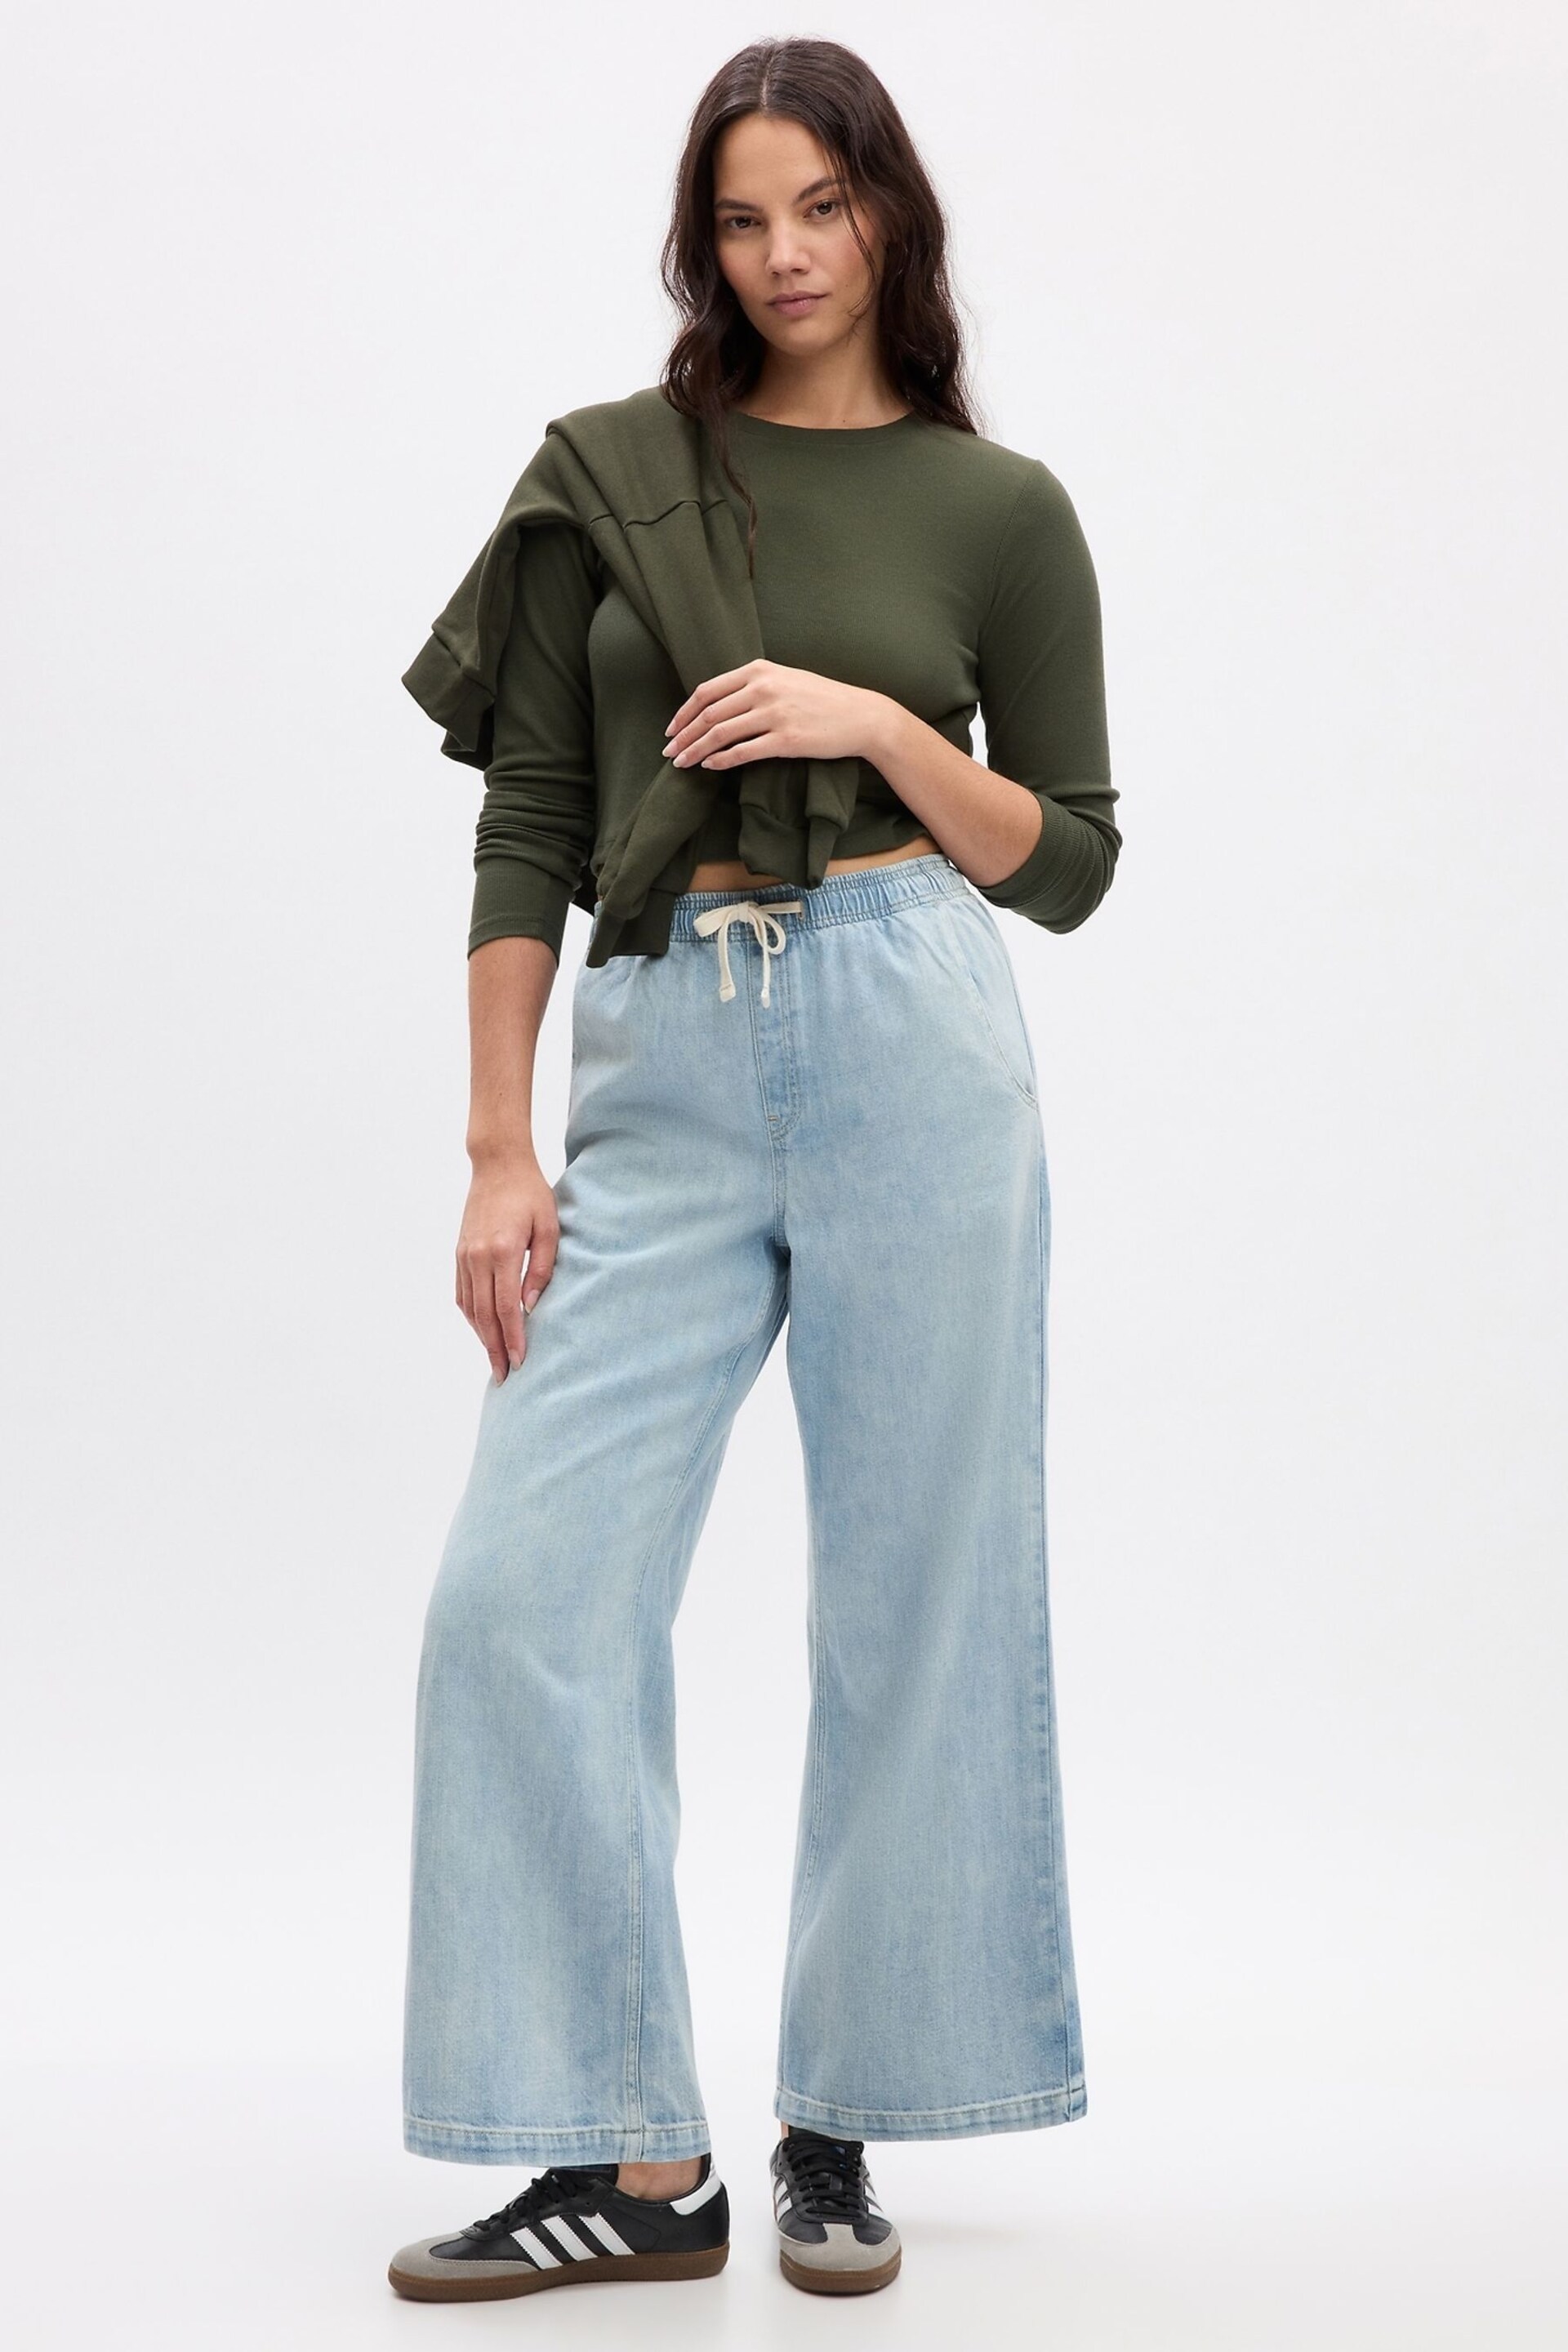 Gap Light Blue Wide Leg High Waisted Pull On Jeans - Image 1 of 5